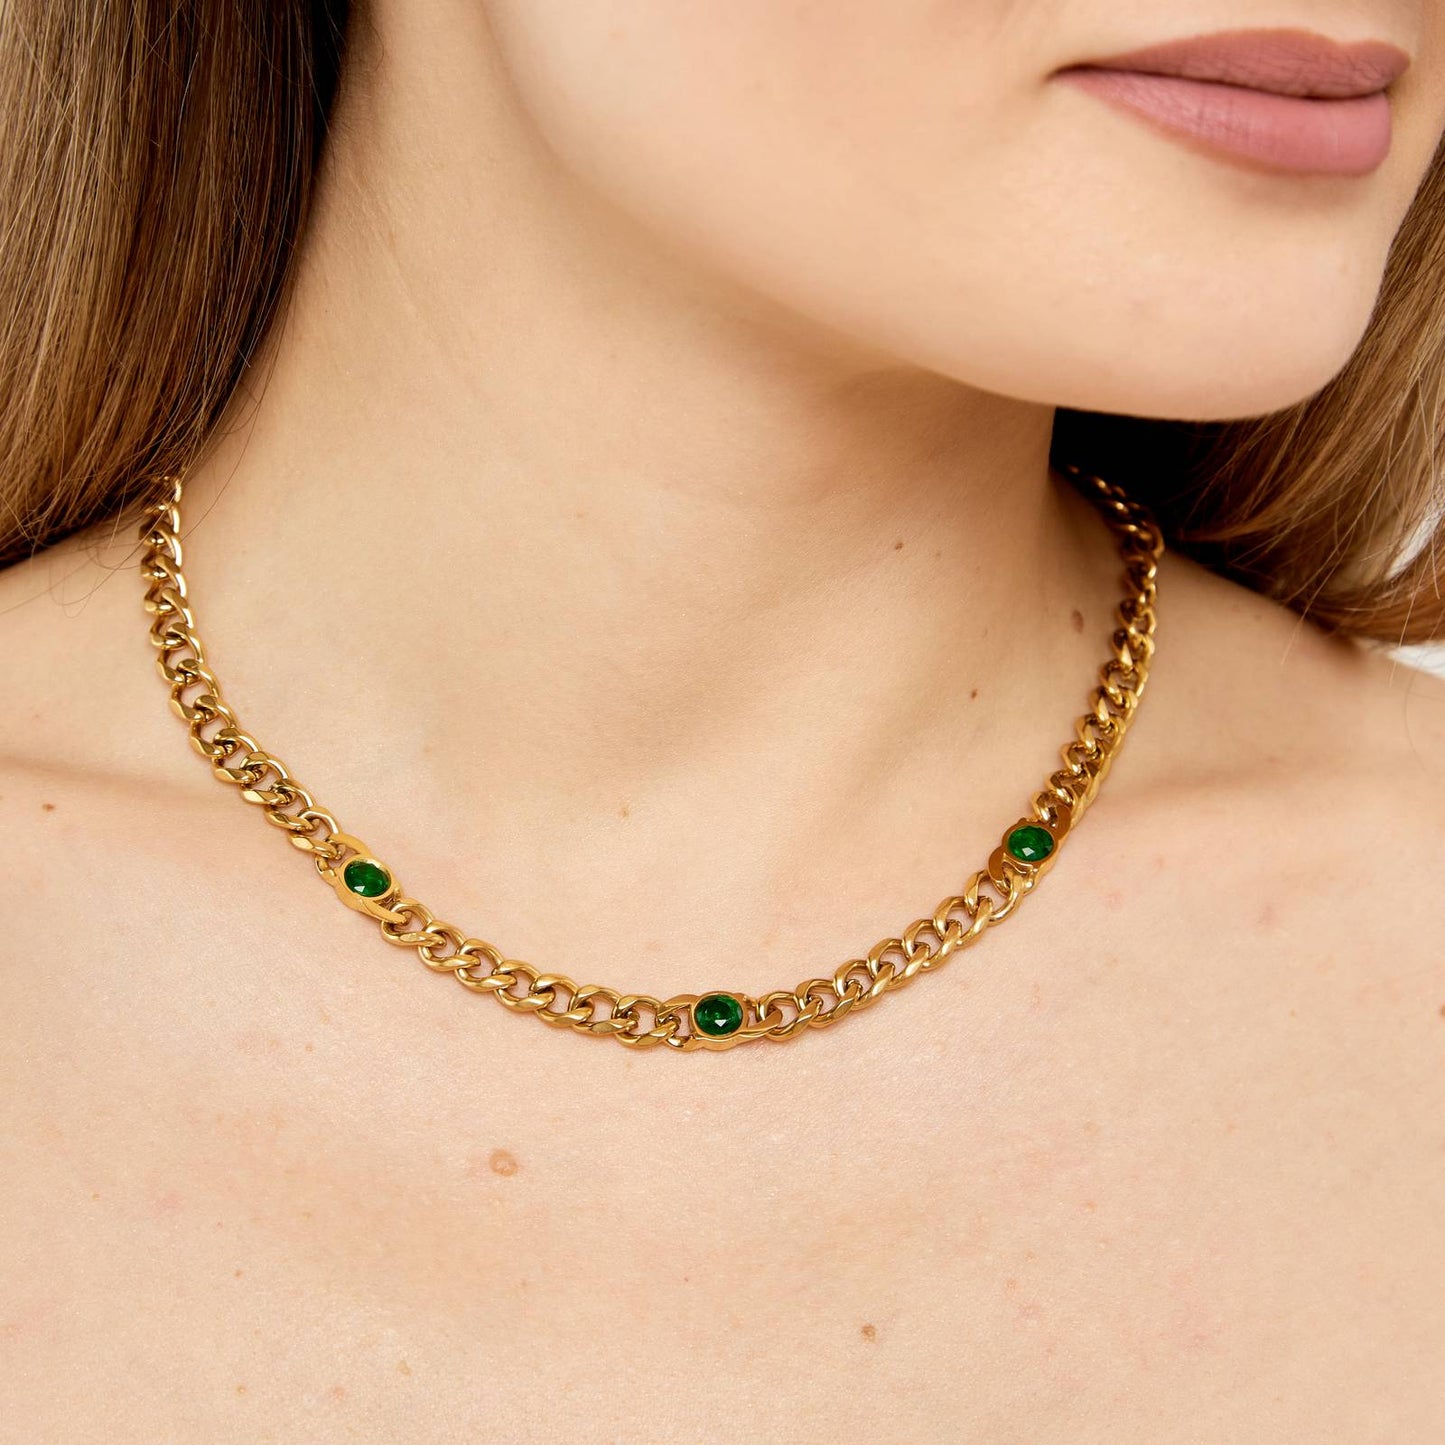 Green and chain link necklace